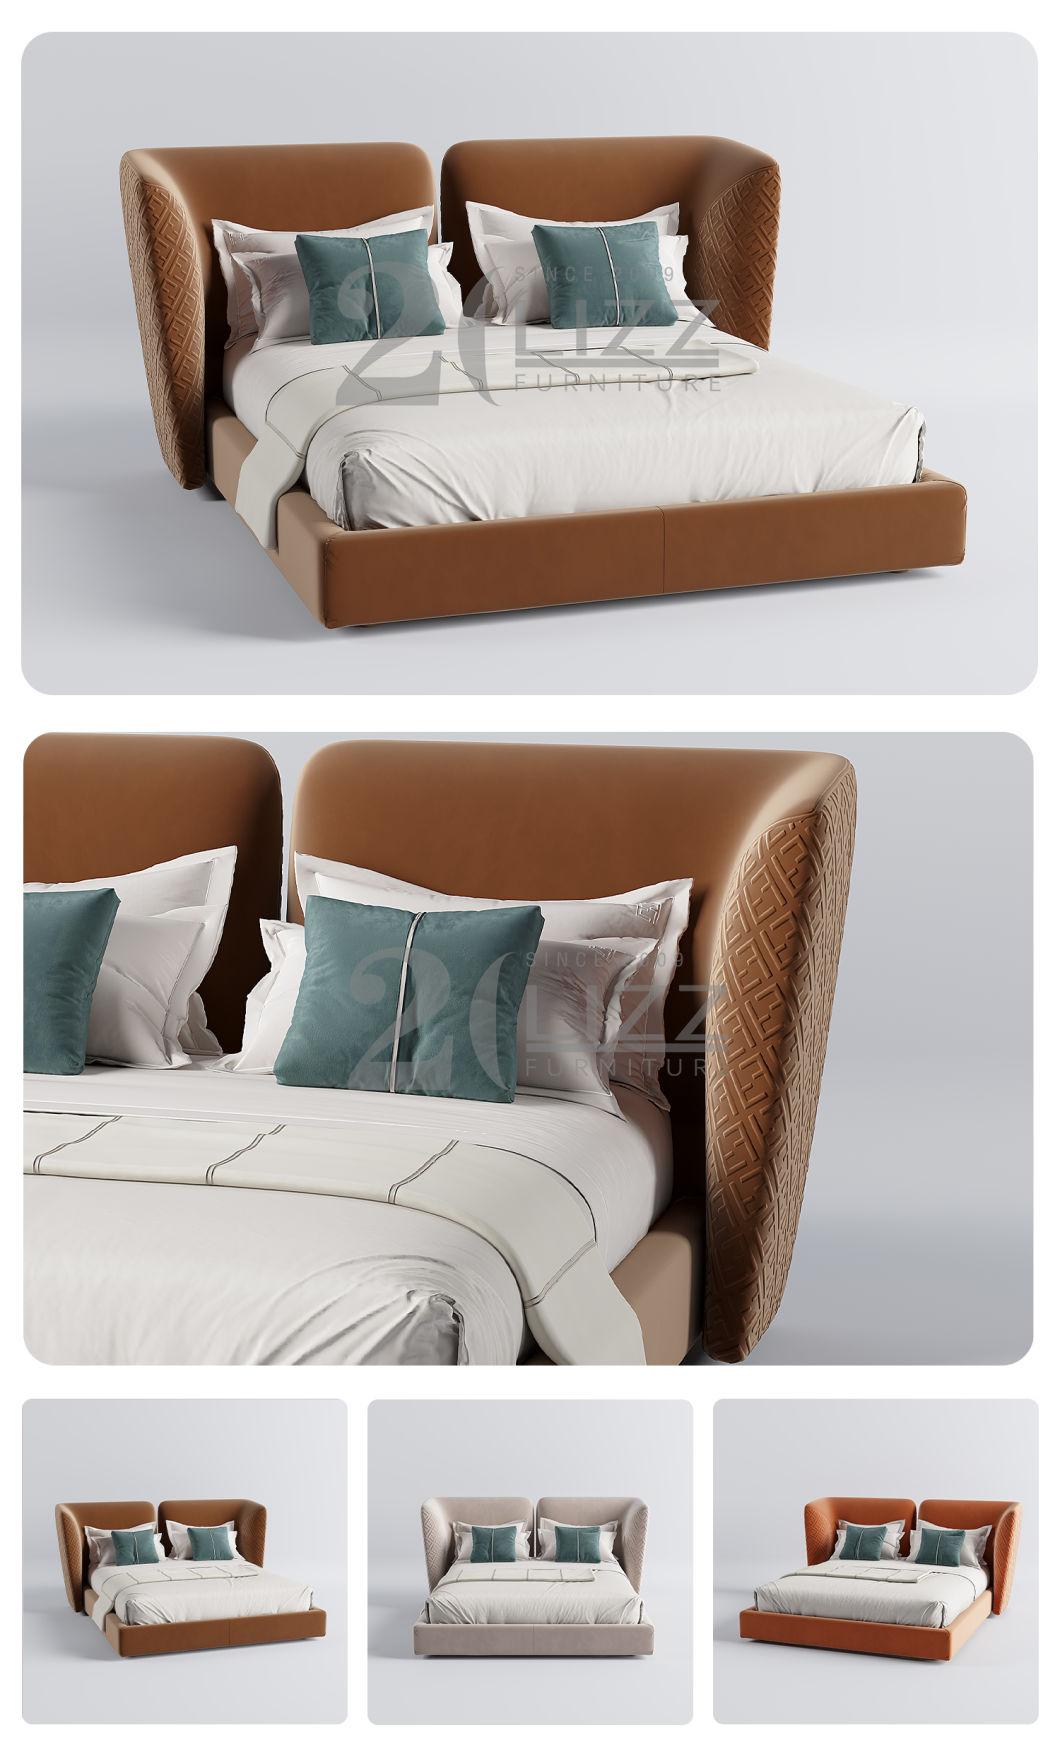 Wholesale Luxury Upholstered King Size Fabric Bed Modern Wooden Home Hotel Furniture Bedding Set